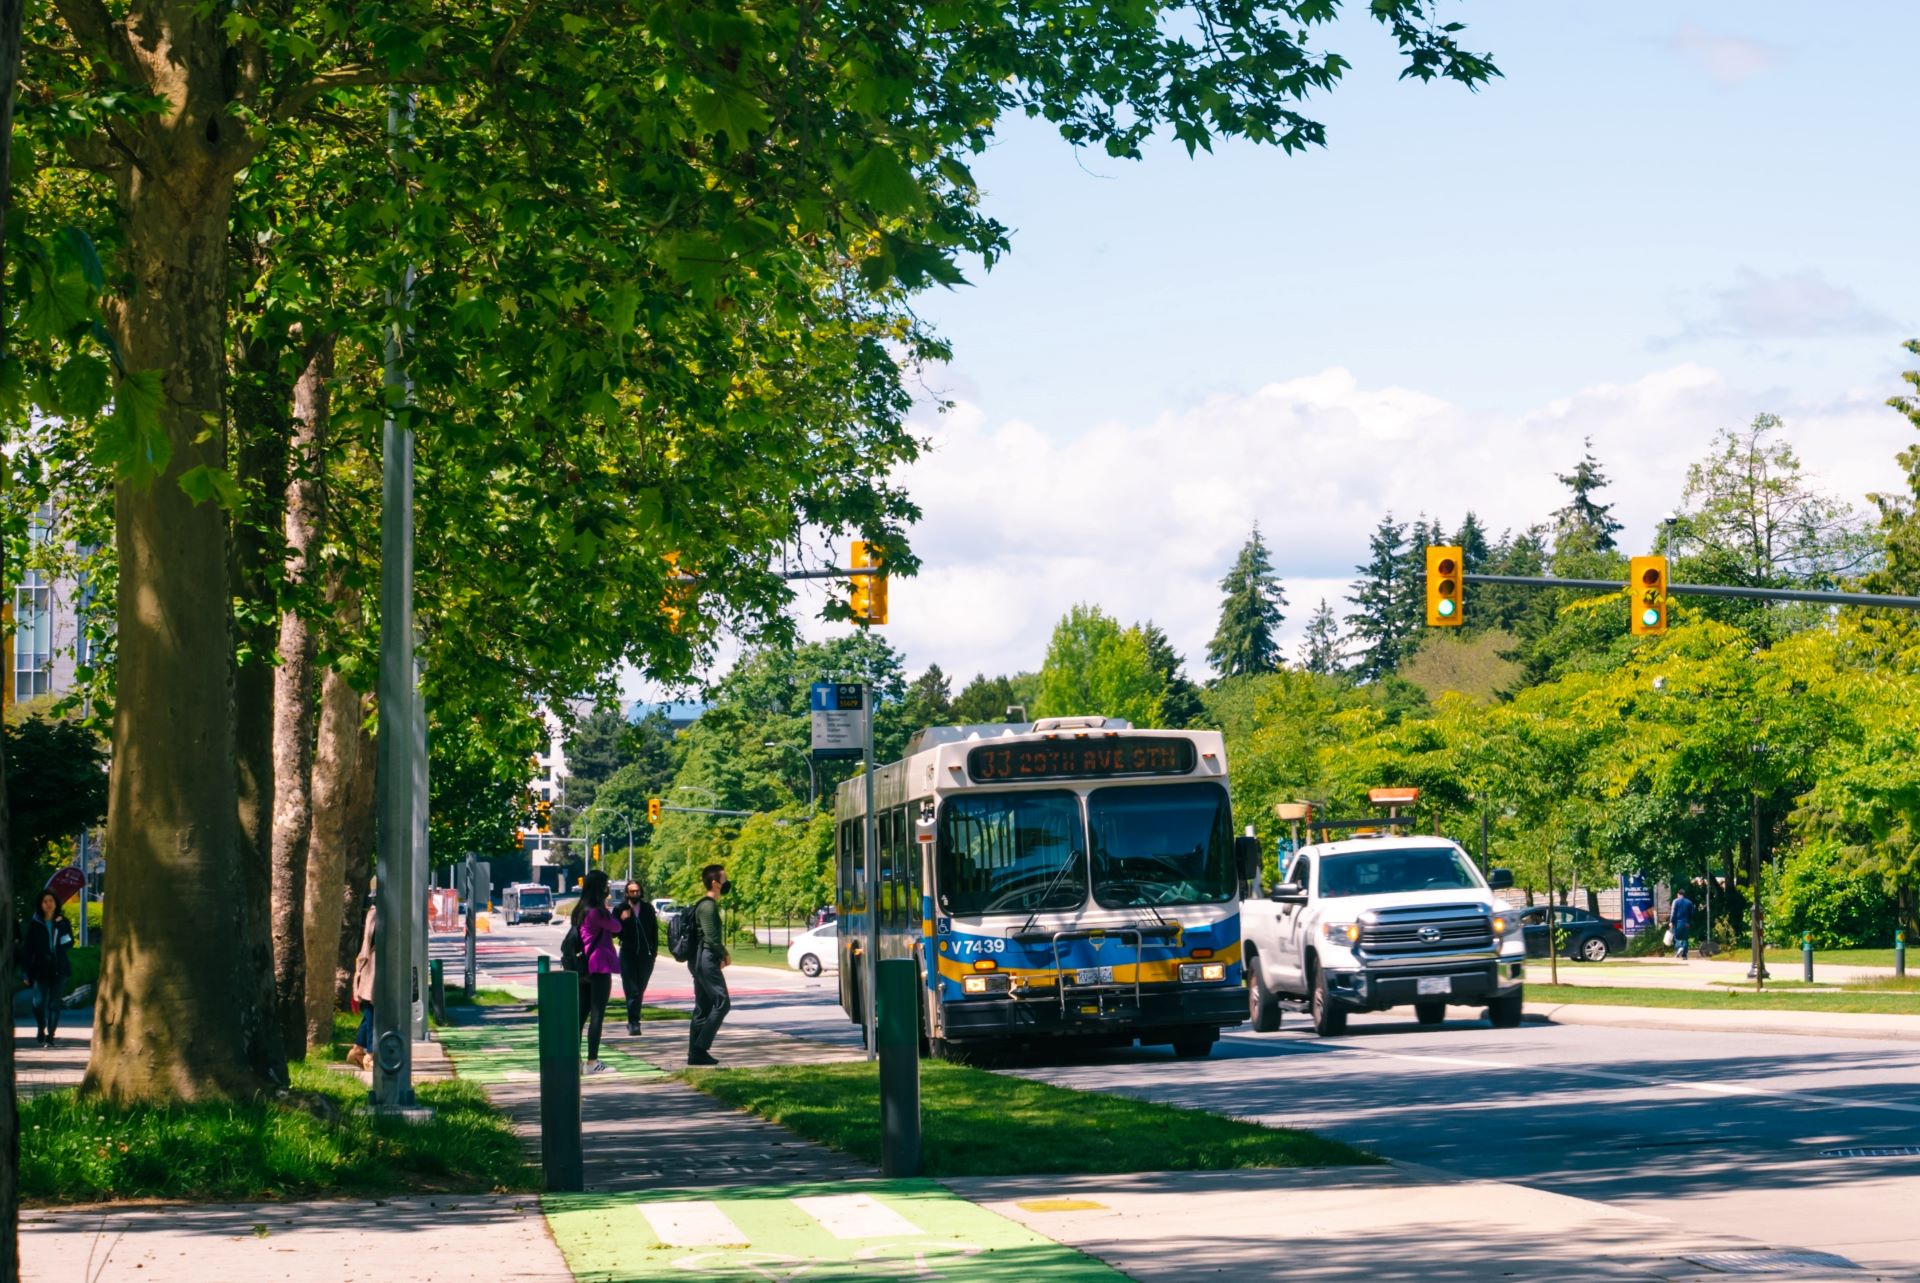 The 33 bus travelling along Westbrook Mall at UBC